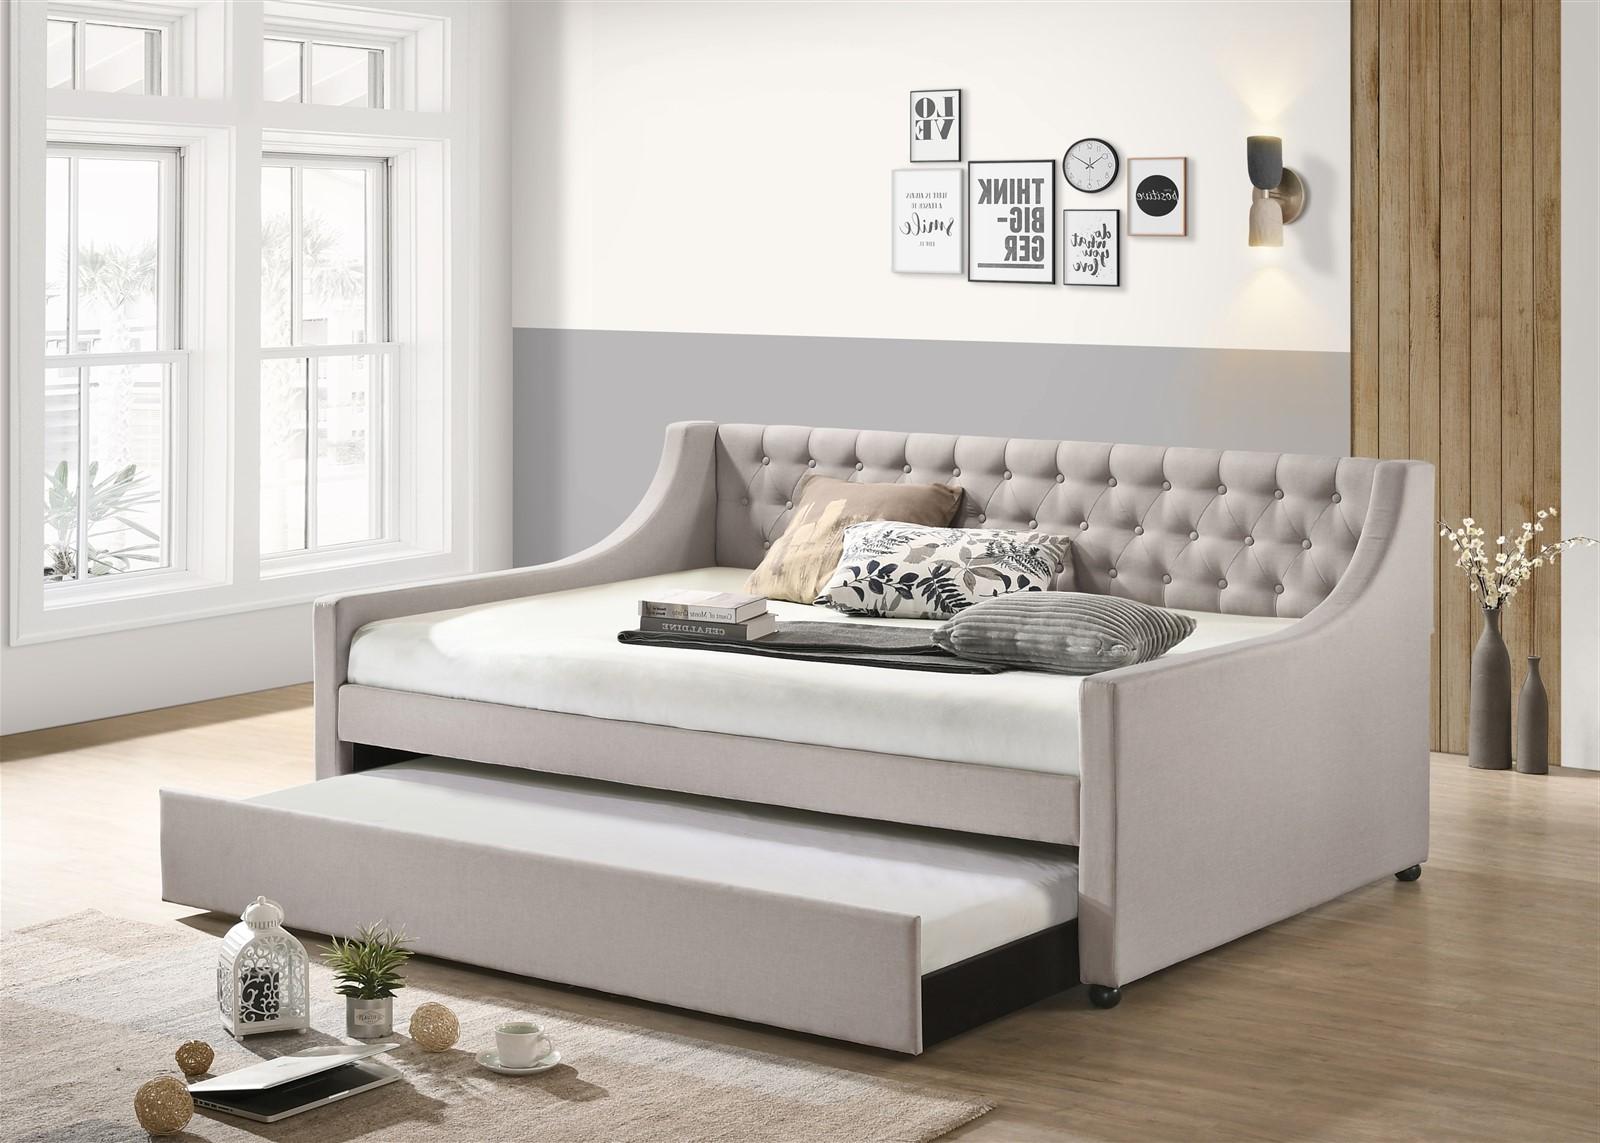 Transitional Daybed w/ trundle Lianna 39395 in Fog Fabric